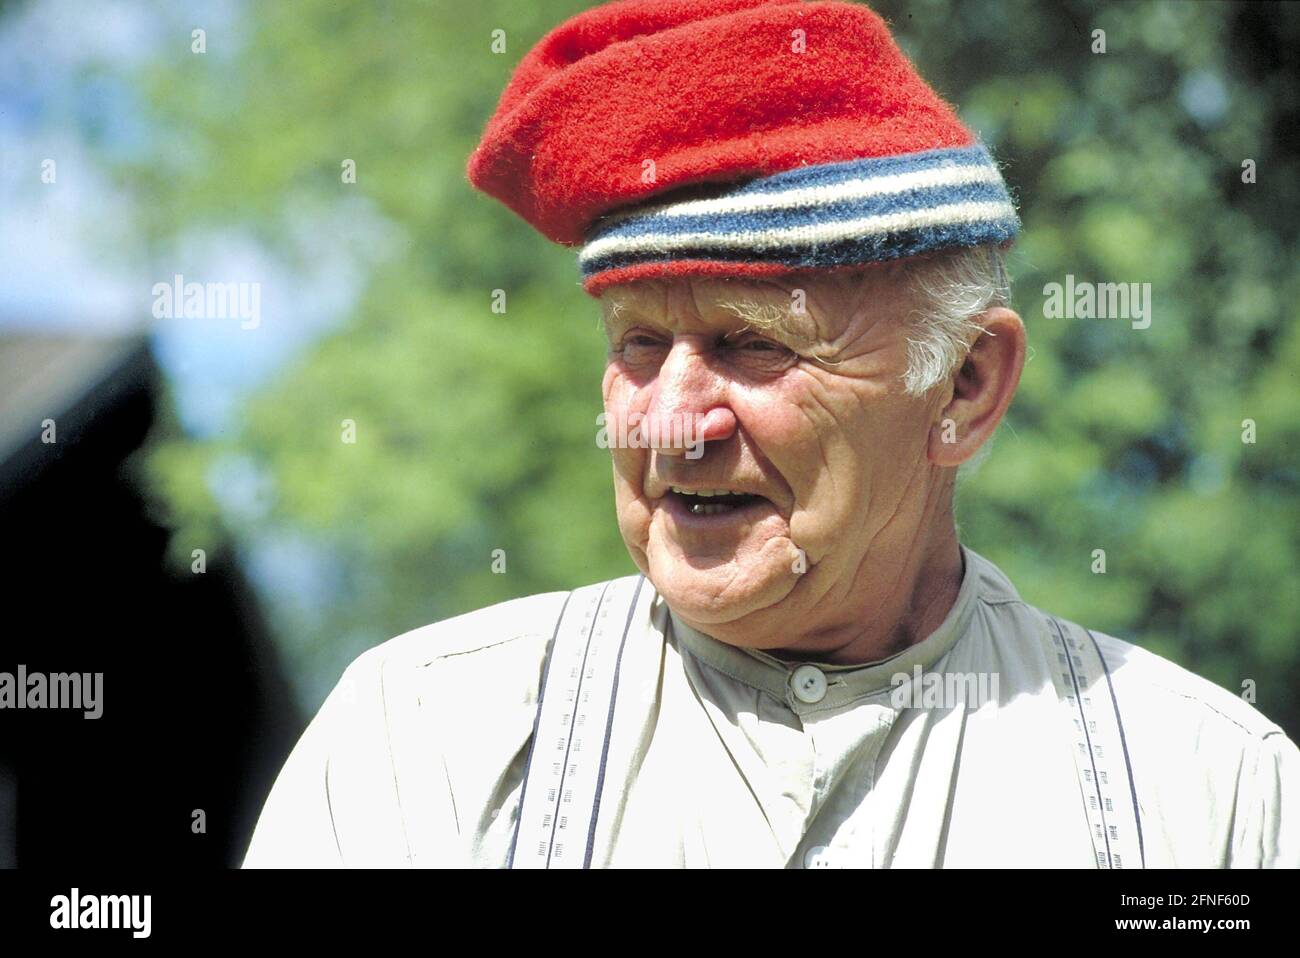 An old farmer wearing a typical Norwegian cap at Maihaugen Open Air Museum. The museum was founded by the dentist Anders Sandvig (1862-1950) and is one of the largest open-air museums in Scandinavia. The museum illustrates traditional Norwegian farming culture. [automated translation] Stock Photo